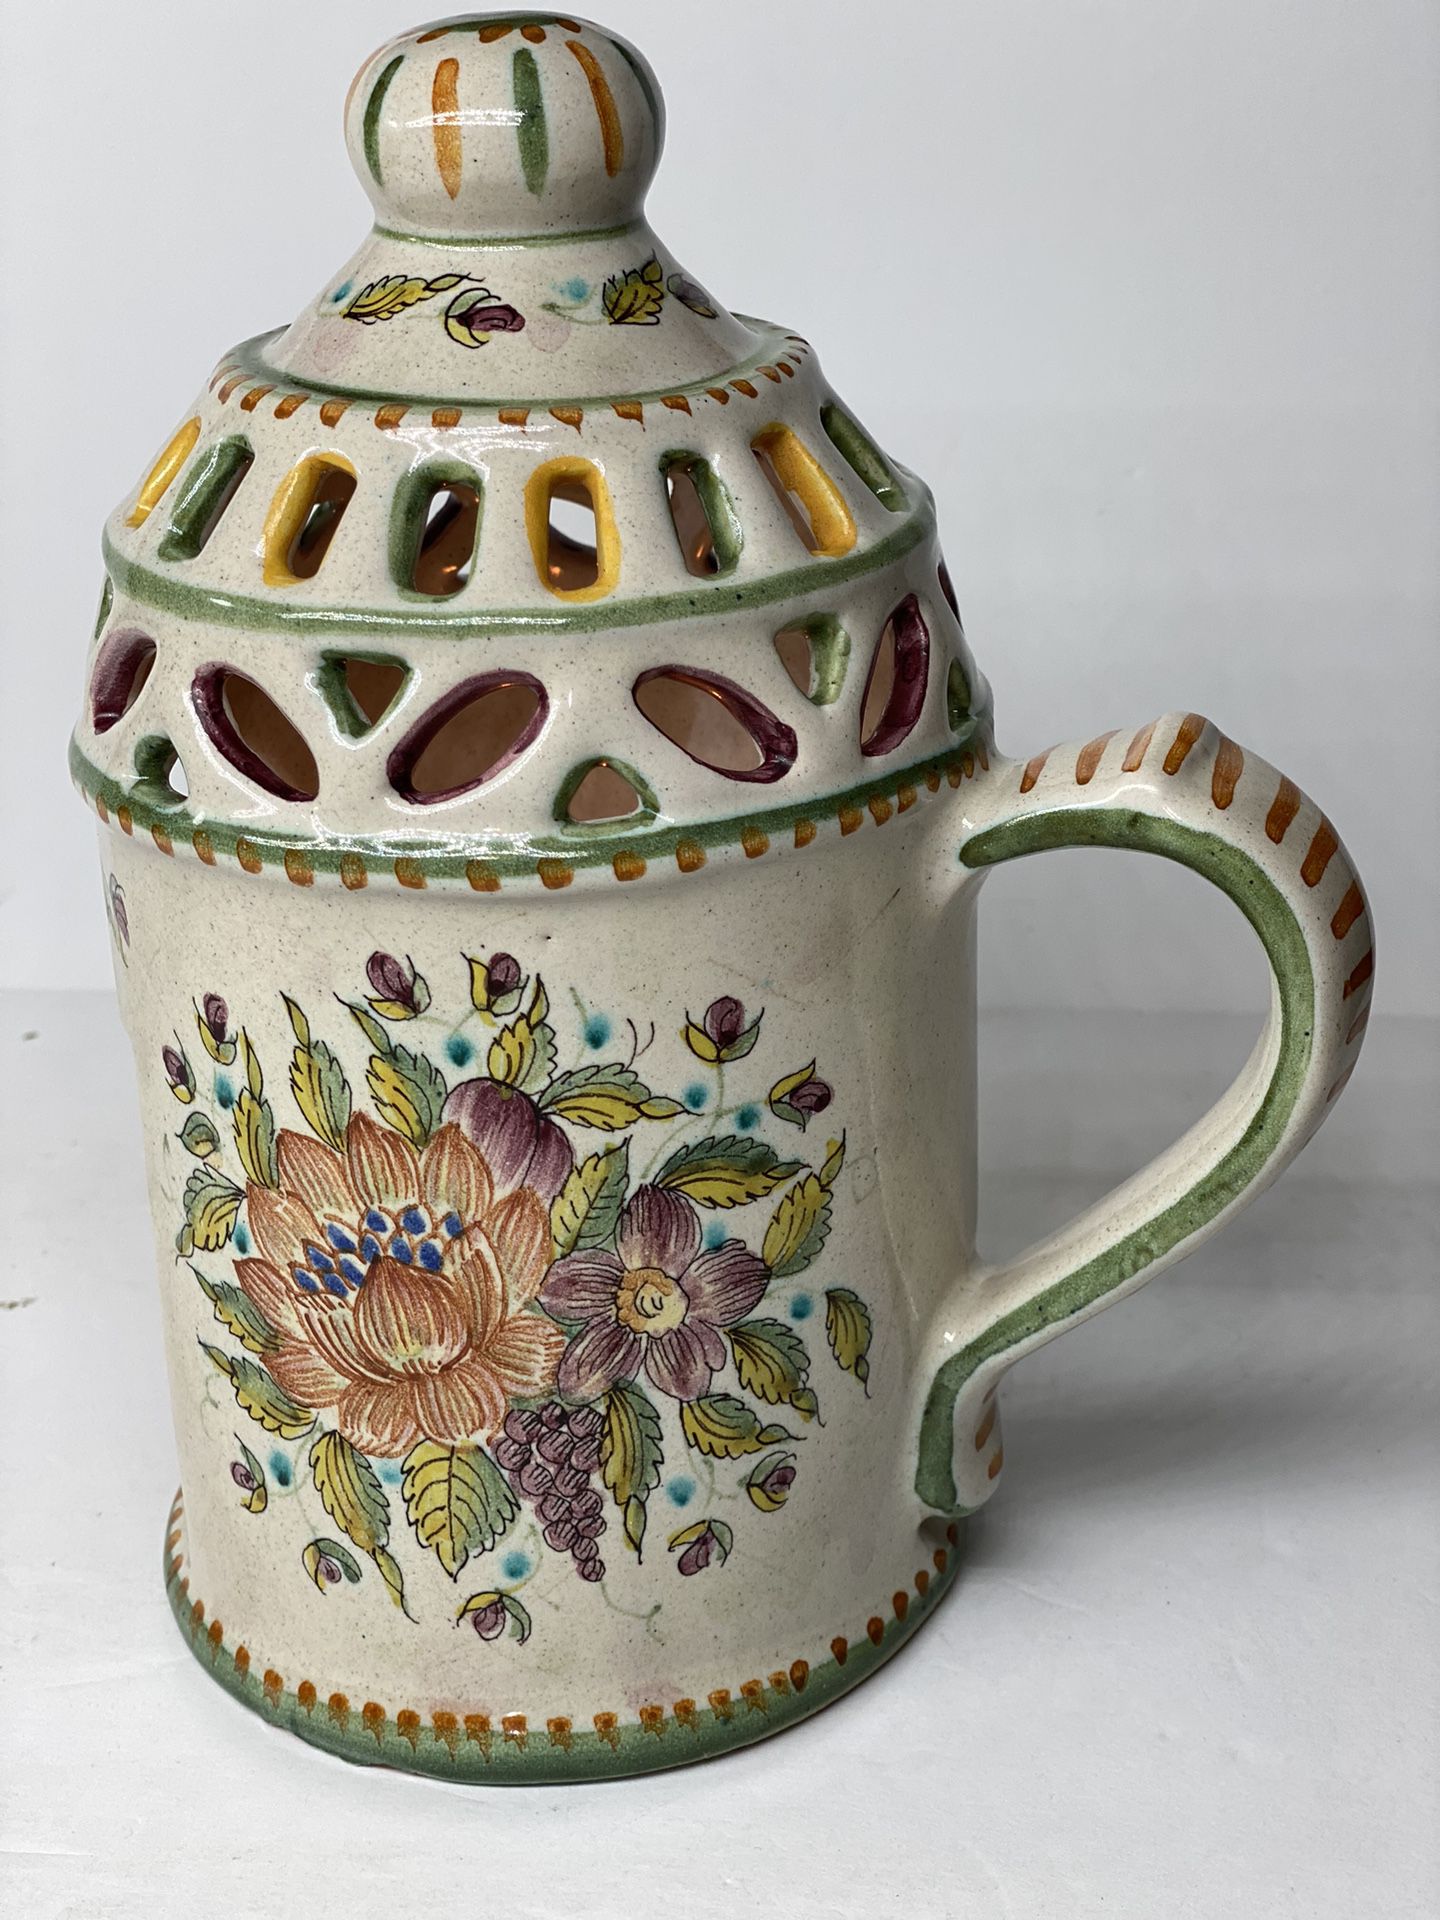 Gorgeous Rare Vintage Hand Painted Italian Majolica Reticulated Conical Lantern Candle Holder with Handle Polychrome Floral and Foliate Motif.  19th C